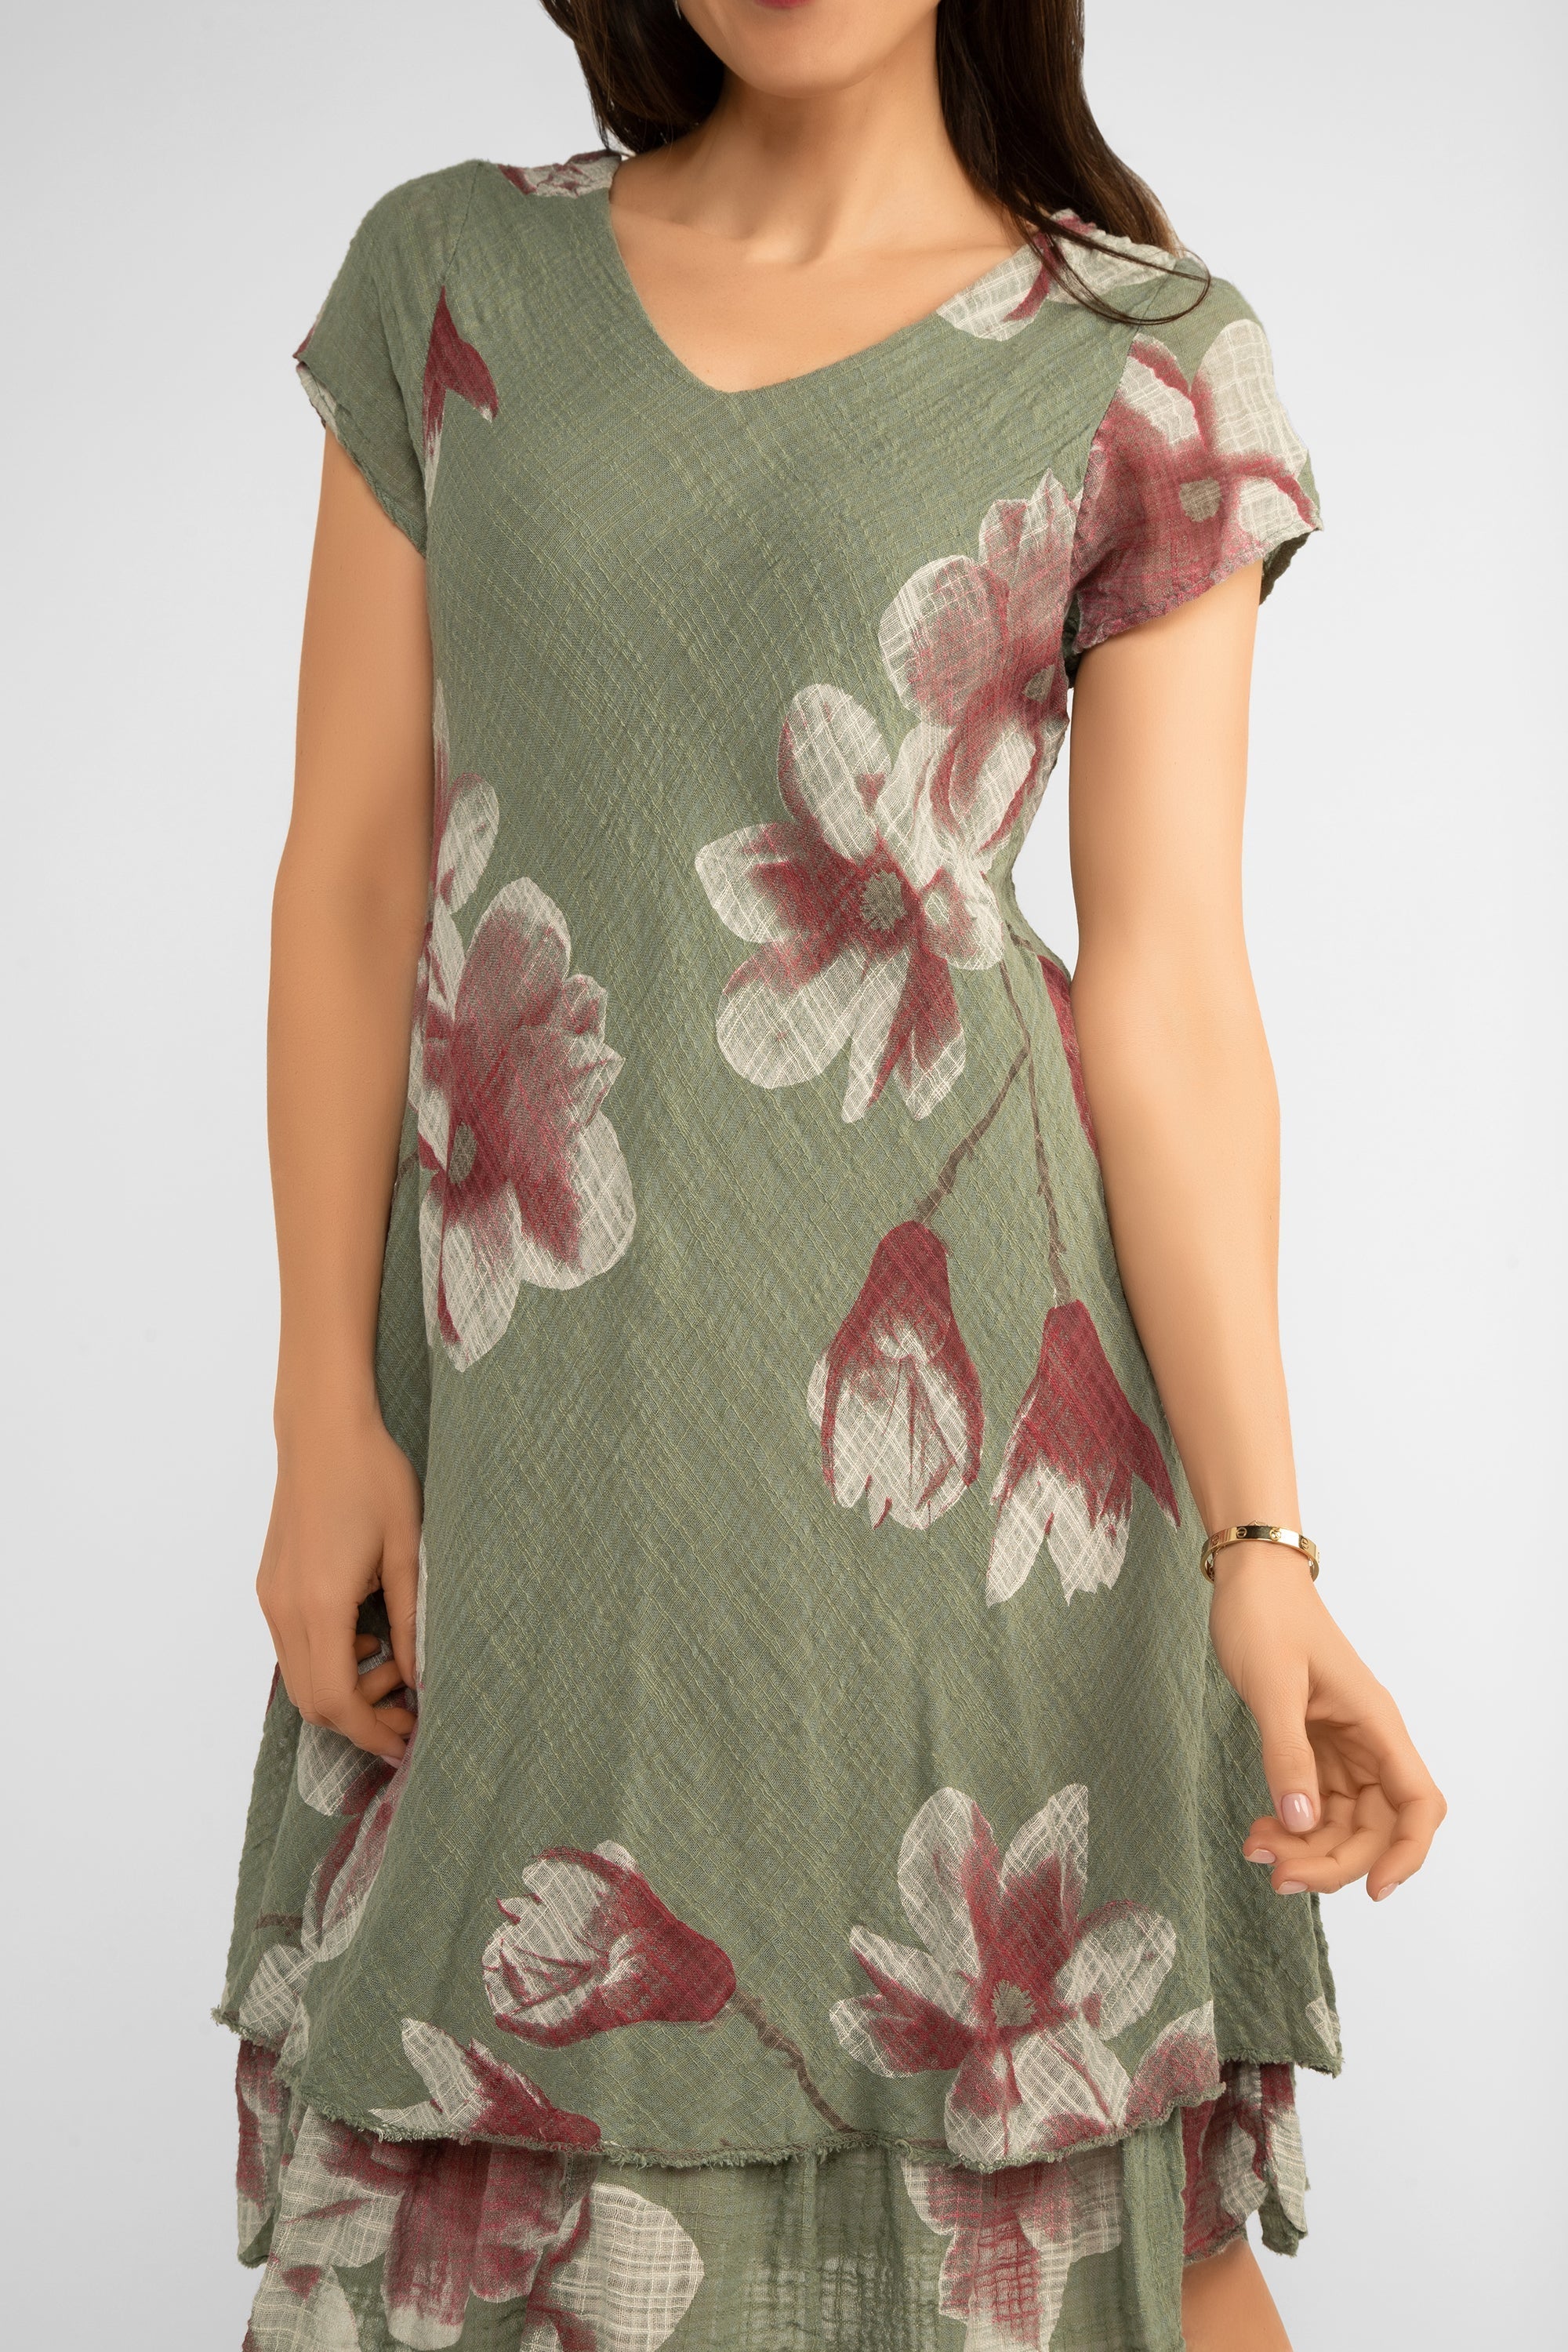 Front close up of Bella Amore (6859A) Women's Short Sleeve V-Neck Knee Length Cotton Dress with Tiered Skirt in Military Green and Pink Florals